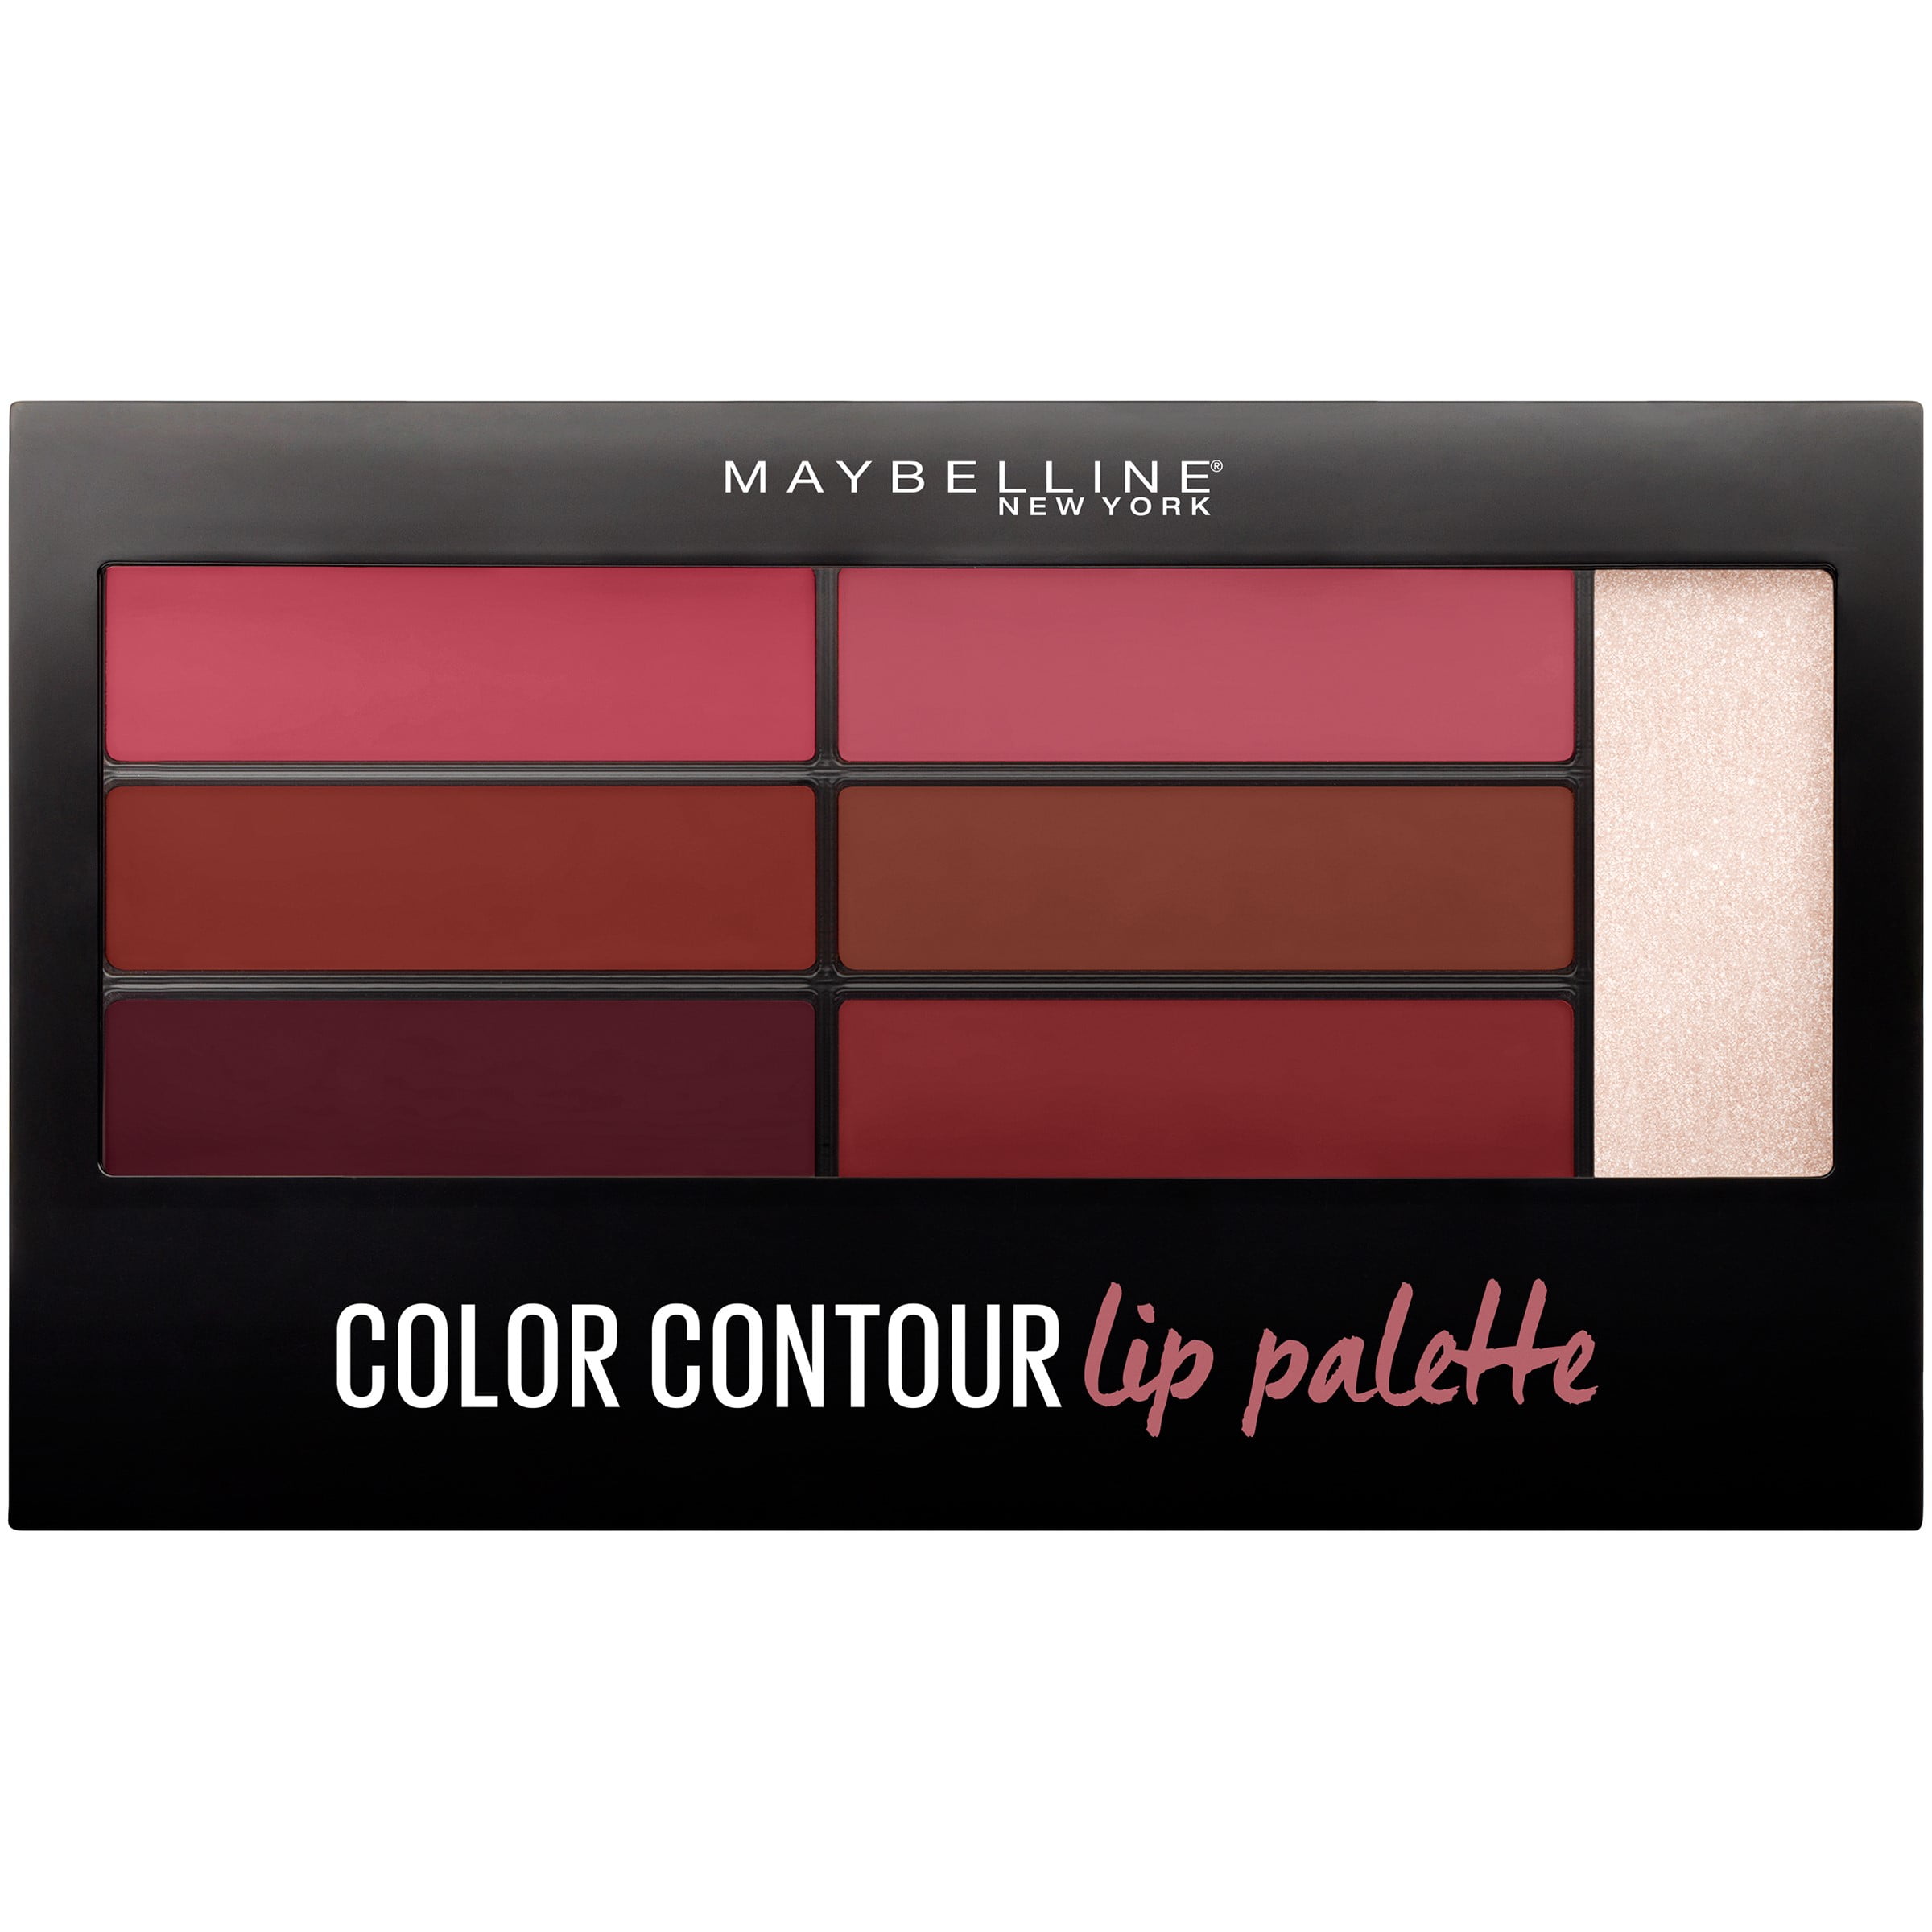  Maybelline New York Lip Studio Color Contour Lip Palette,  Blushed Bombshell, 0.17 oz. : Beauty & Personal Care